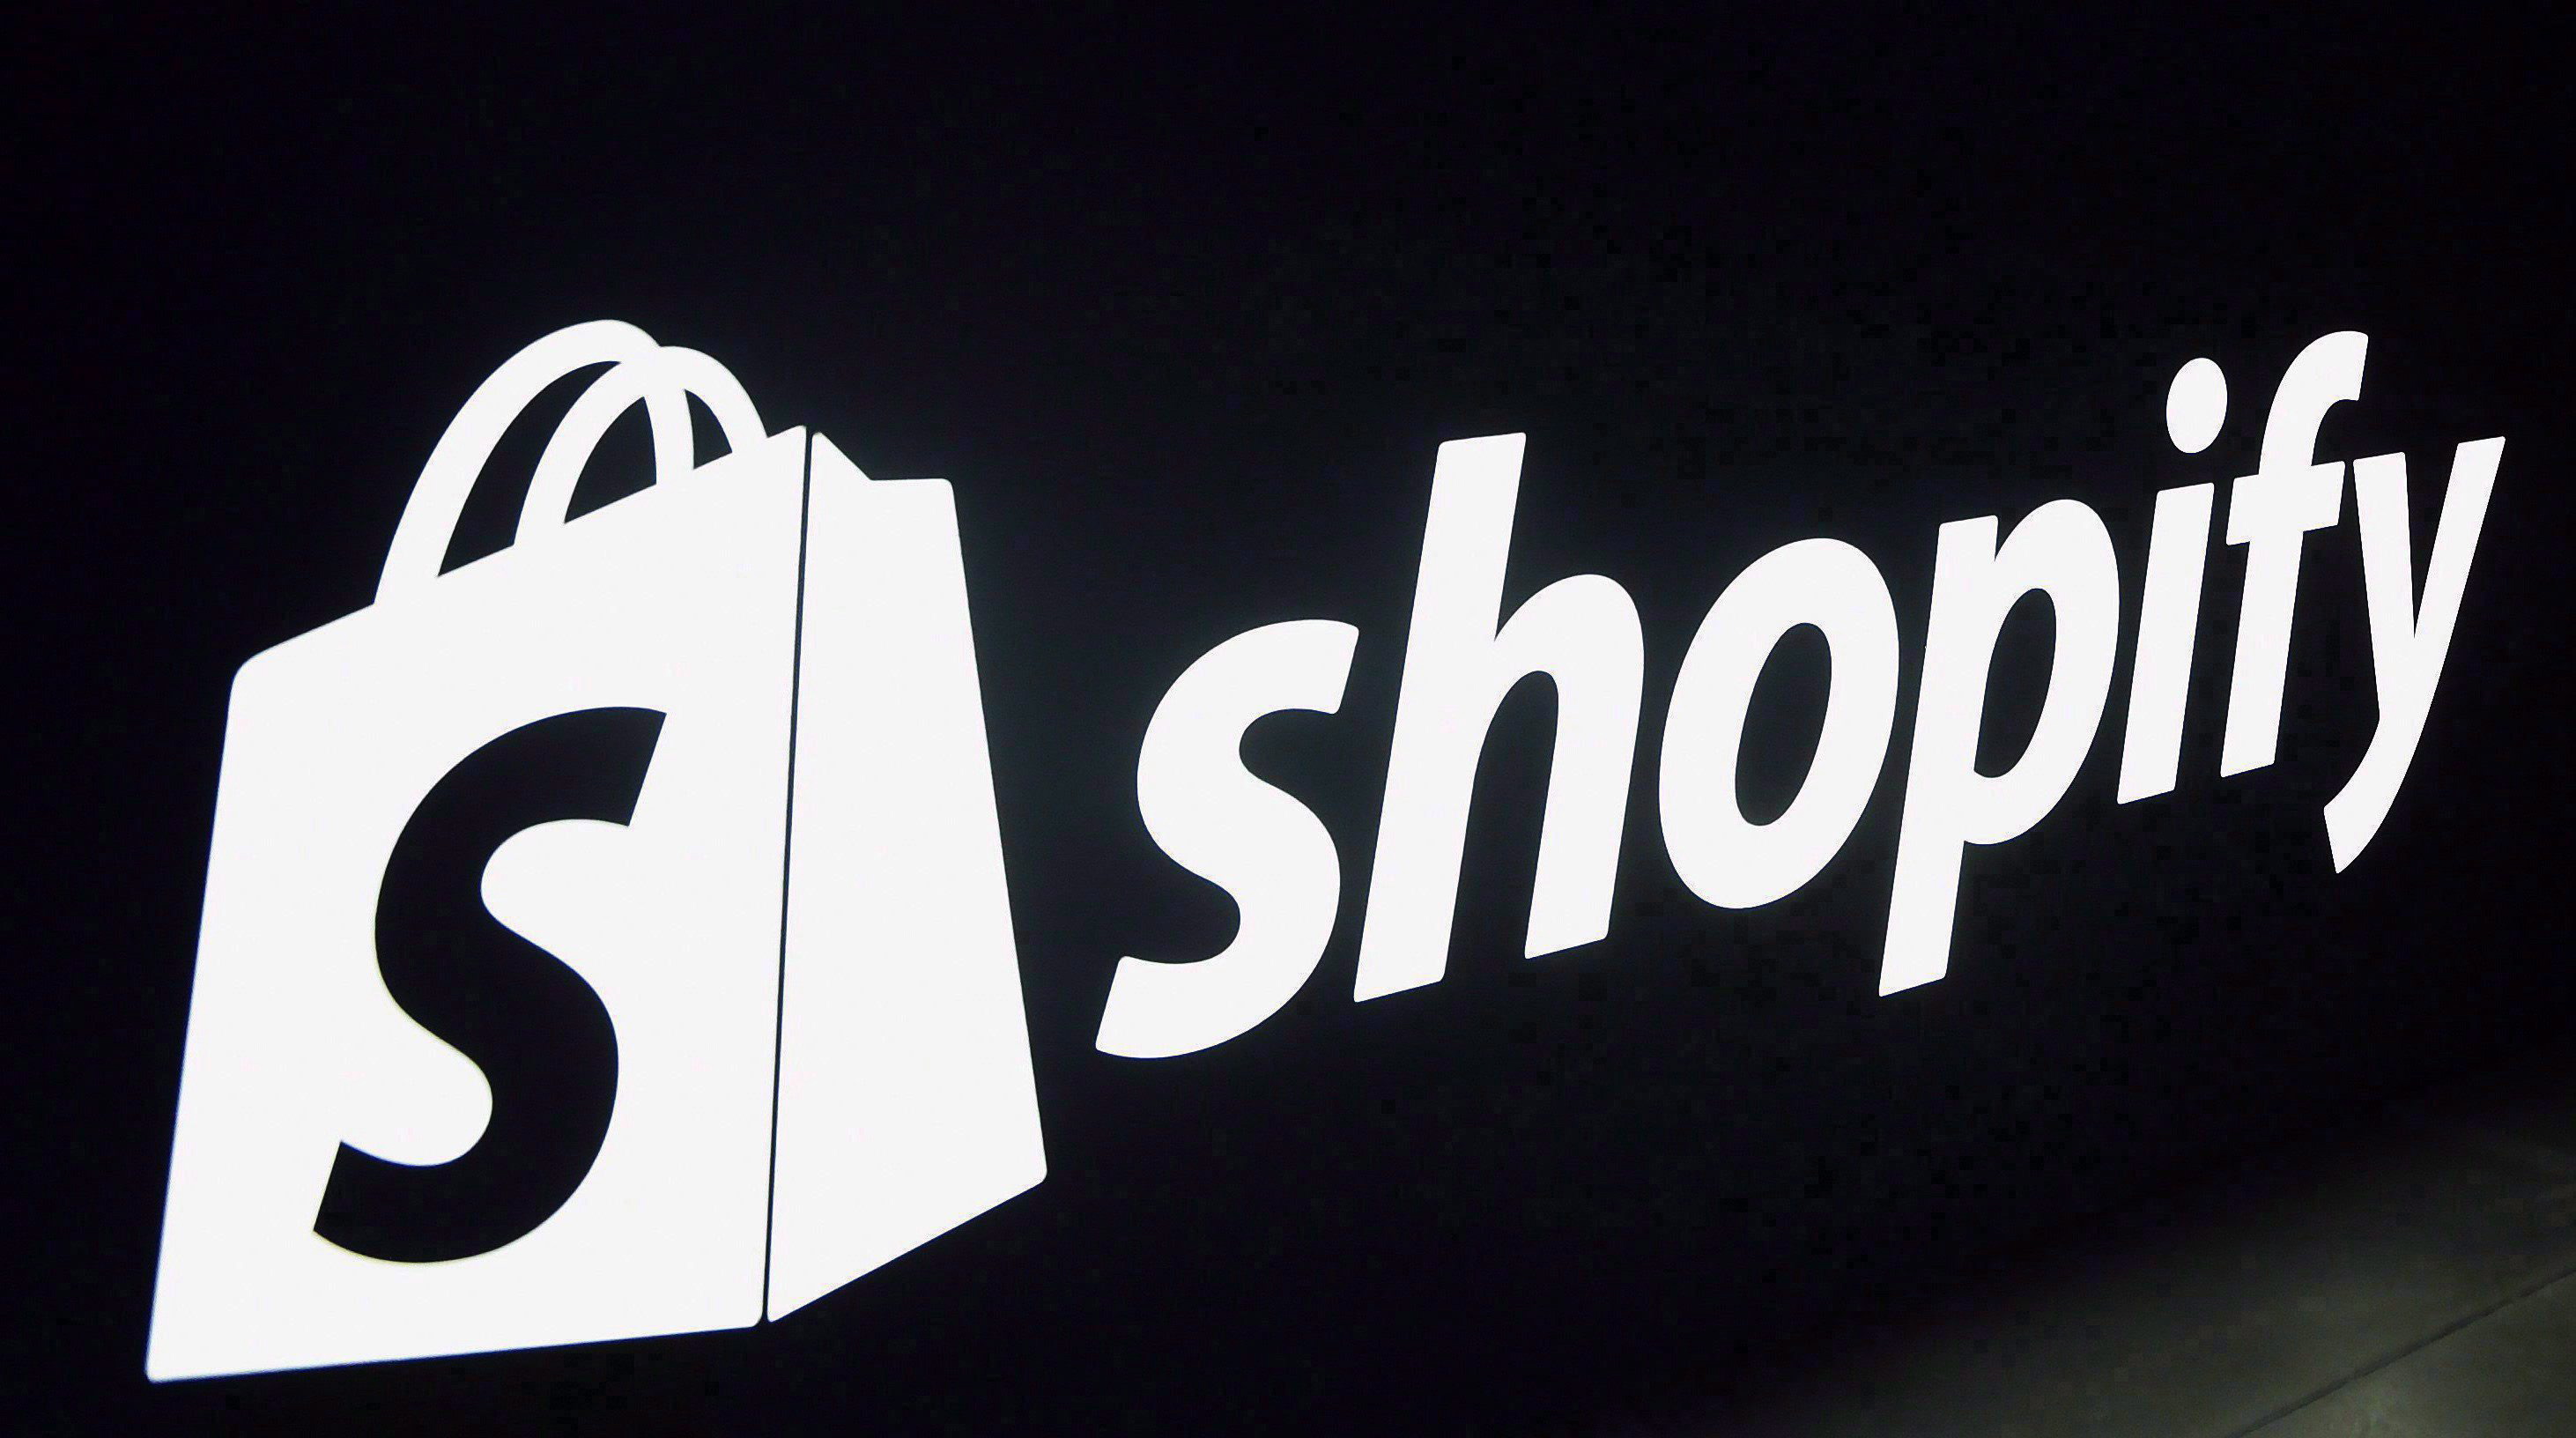 Shopify opens first brick and mortar spot with goal of helping entrepreneurs